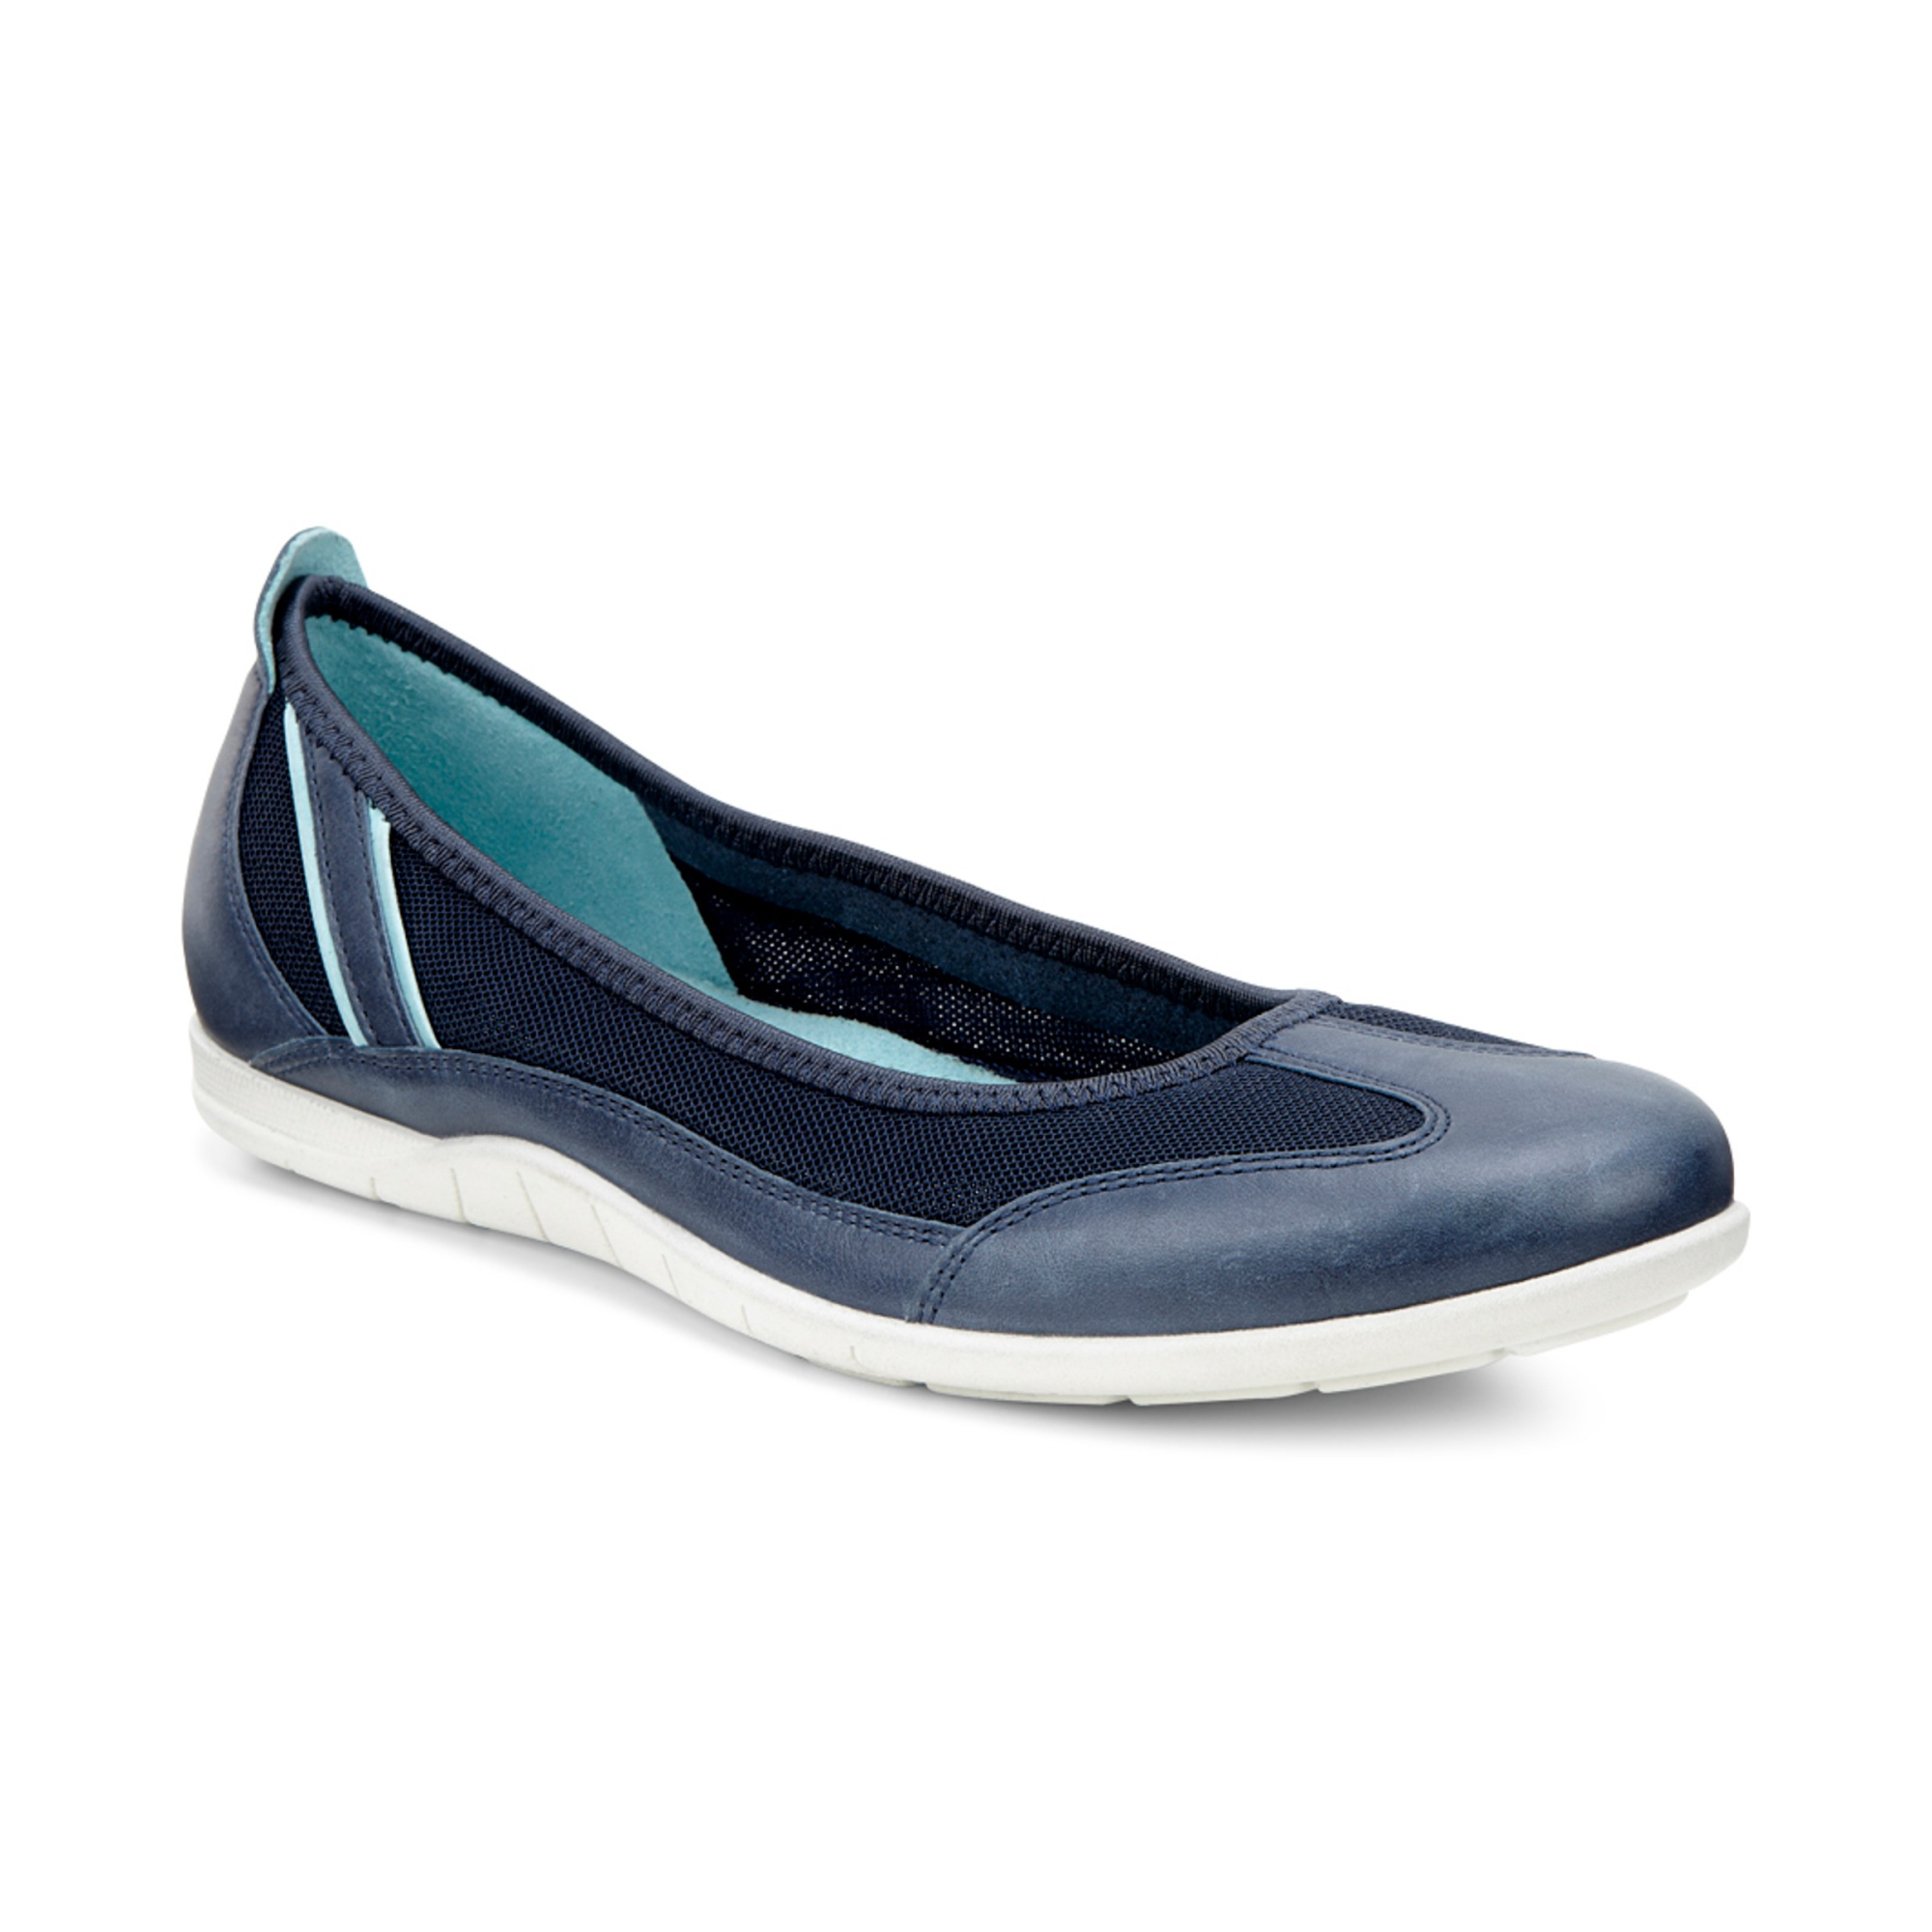 Ecco Bluma Summer Ballerina 41 - Products Veryk - Veryk Mall, many product, quick safe your money!